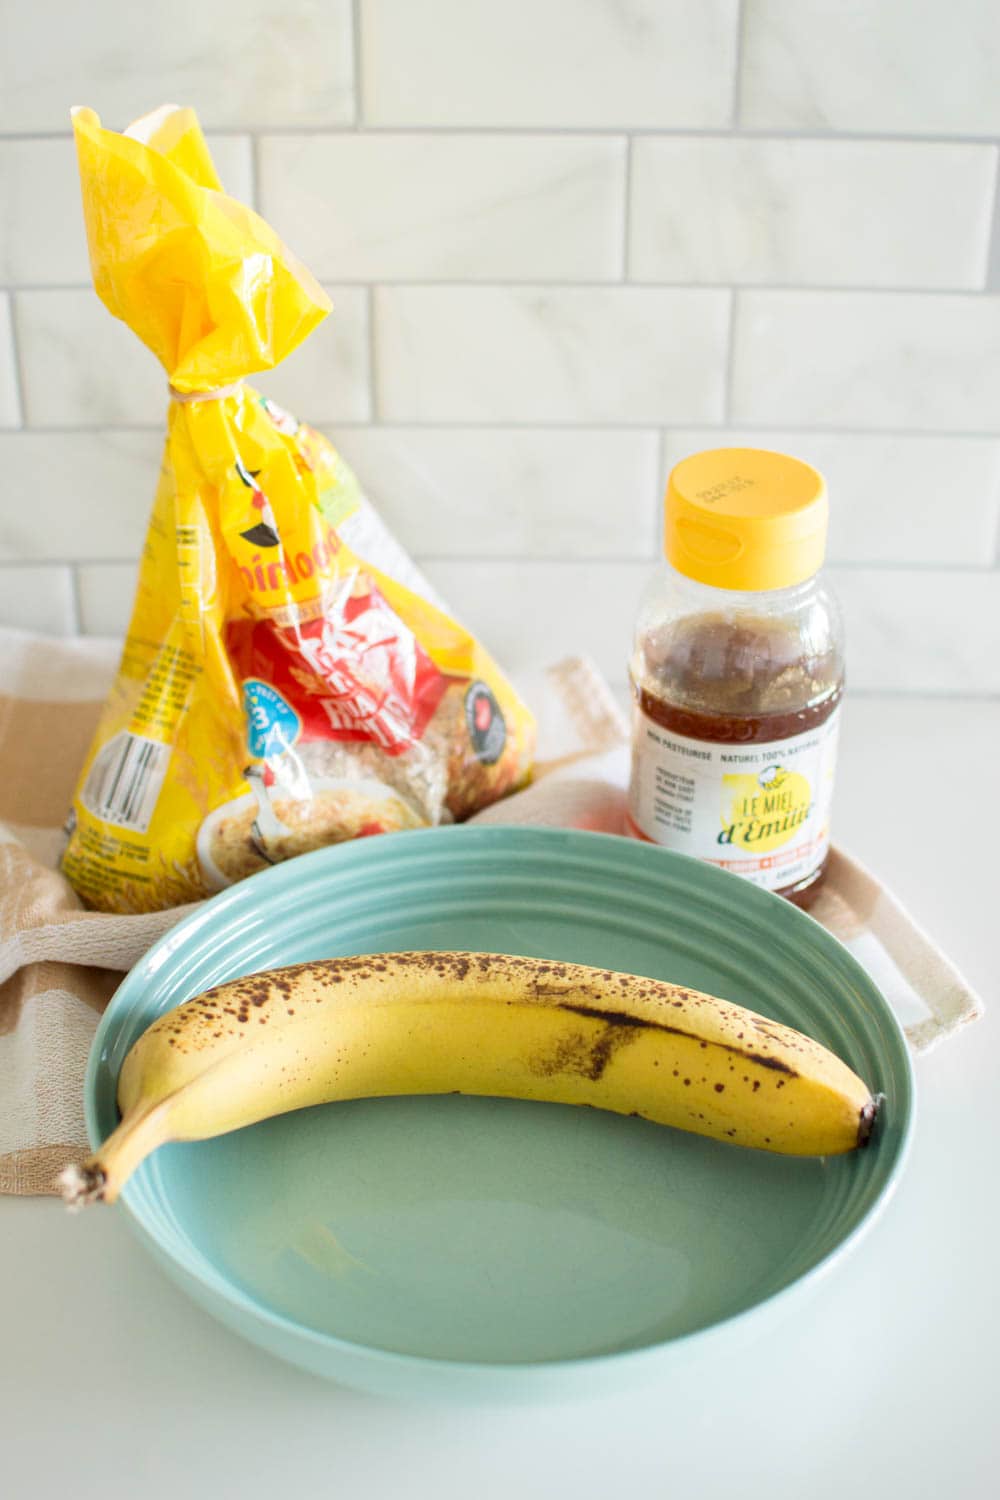 A banana sits in a green bowl, with a bag of oats and a bottle of honey in the background